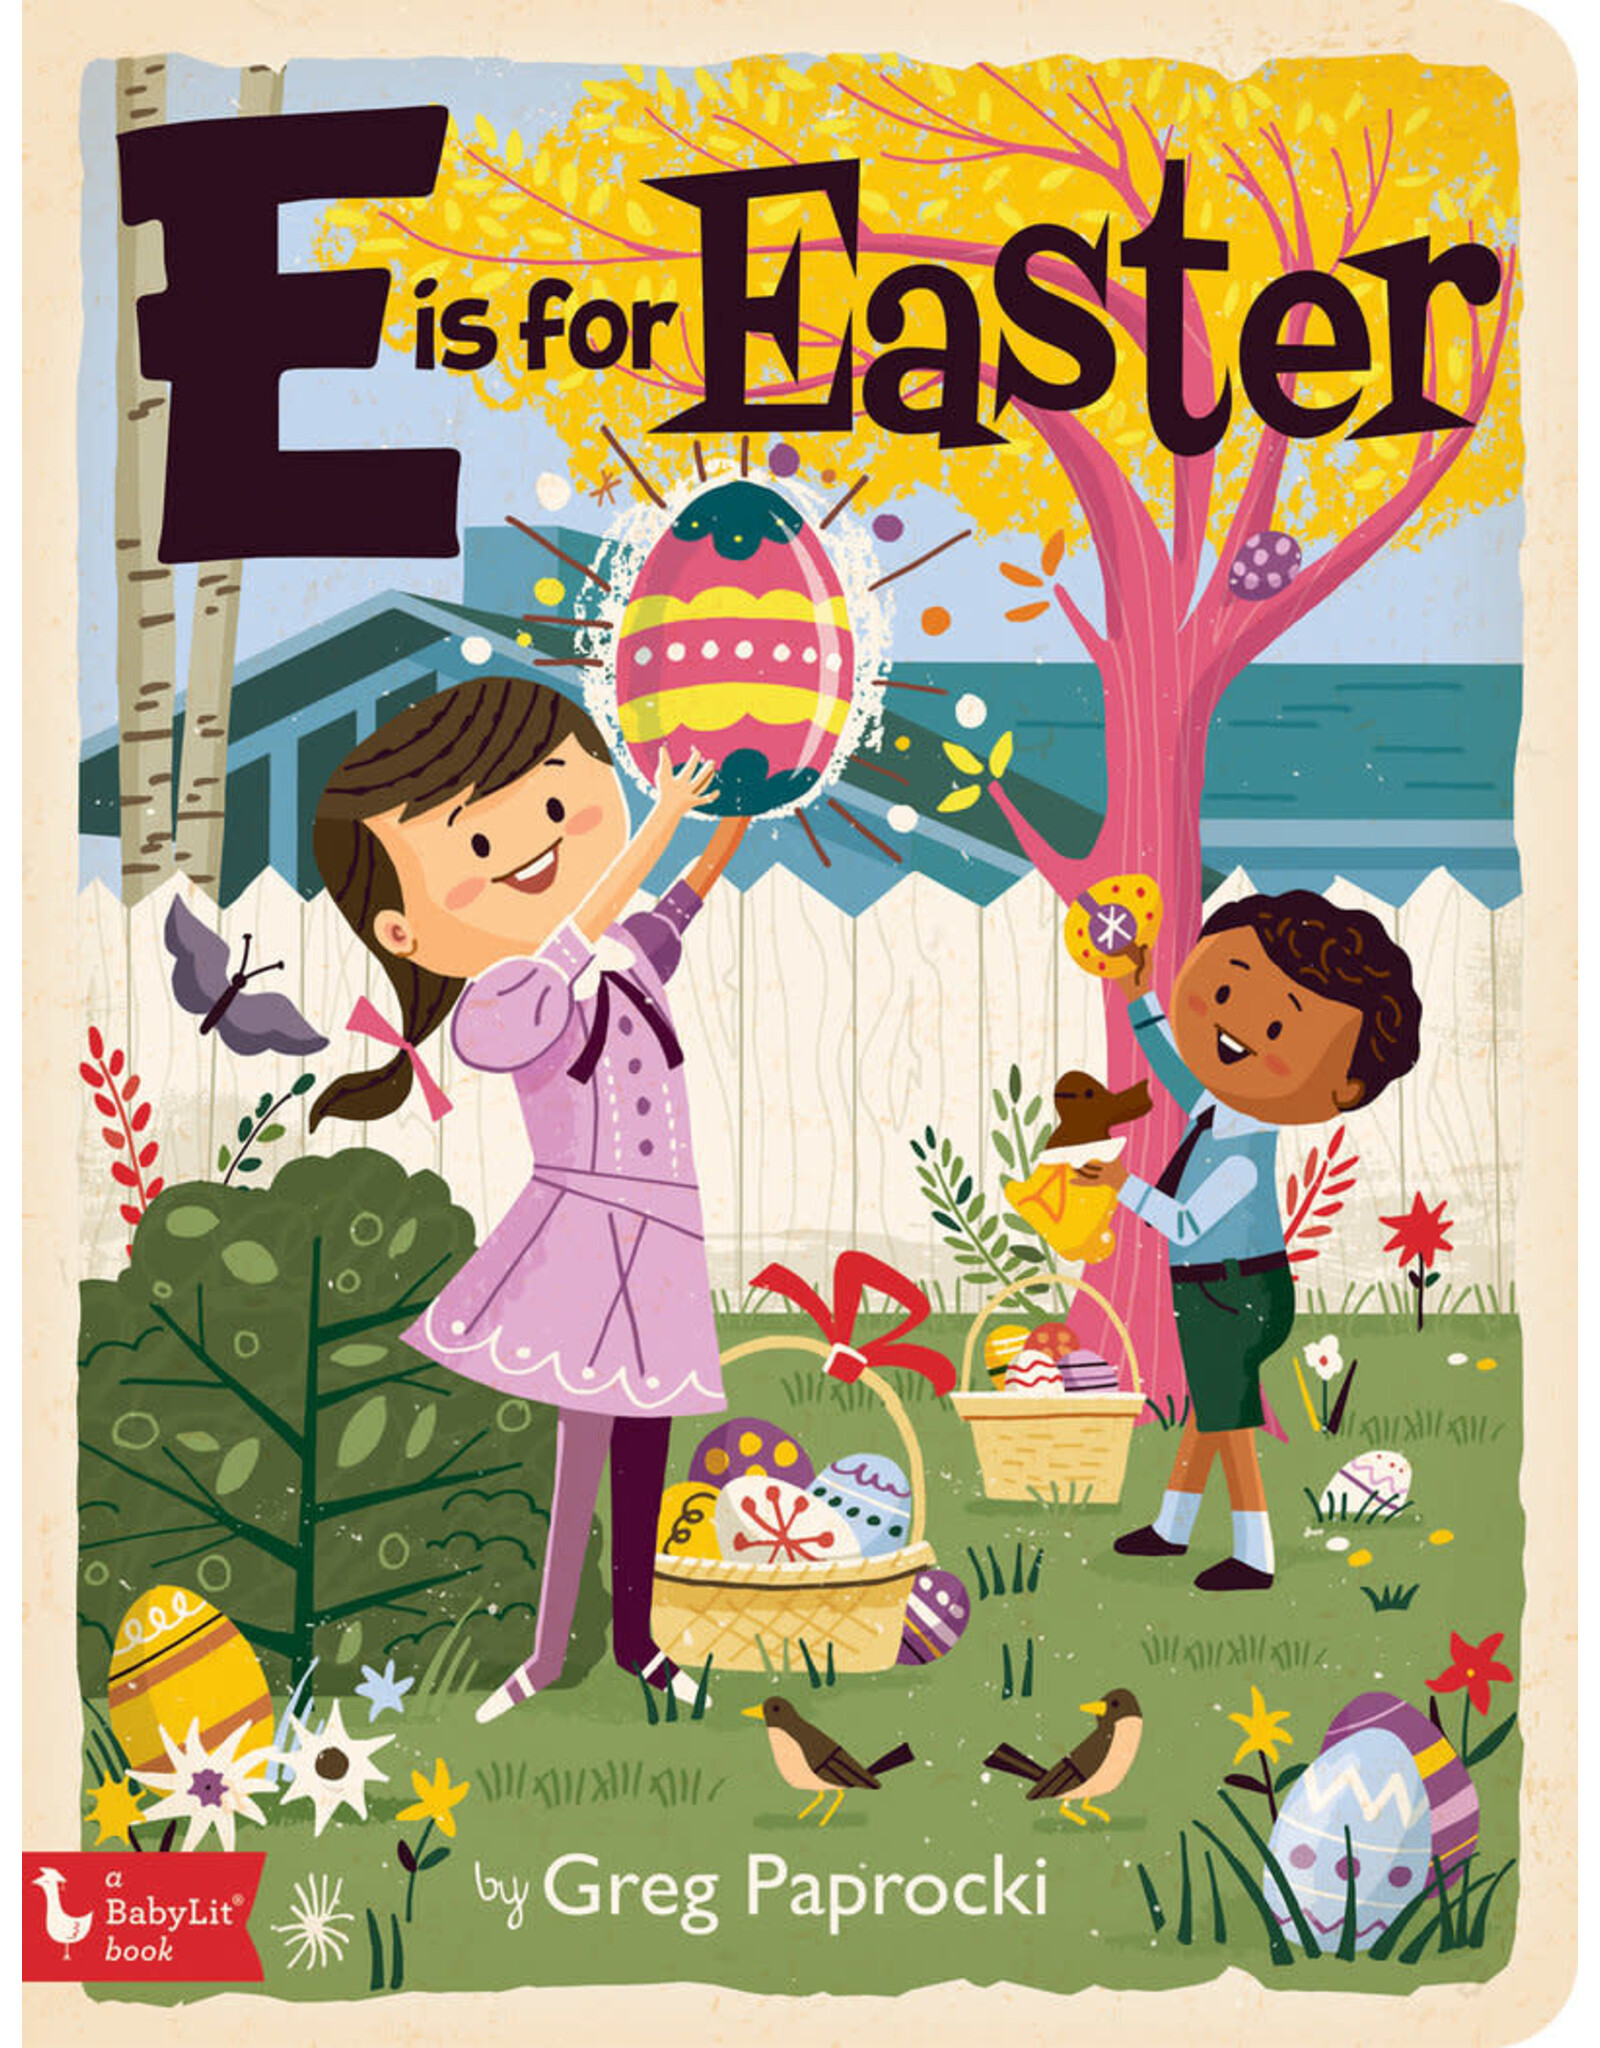 E Is for Easter